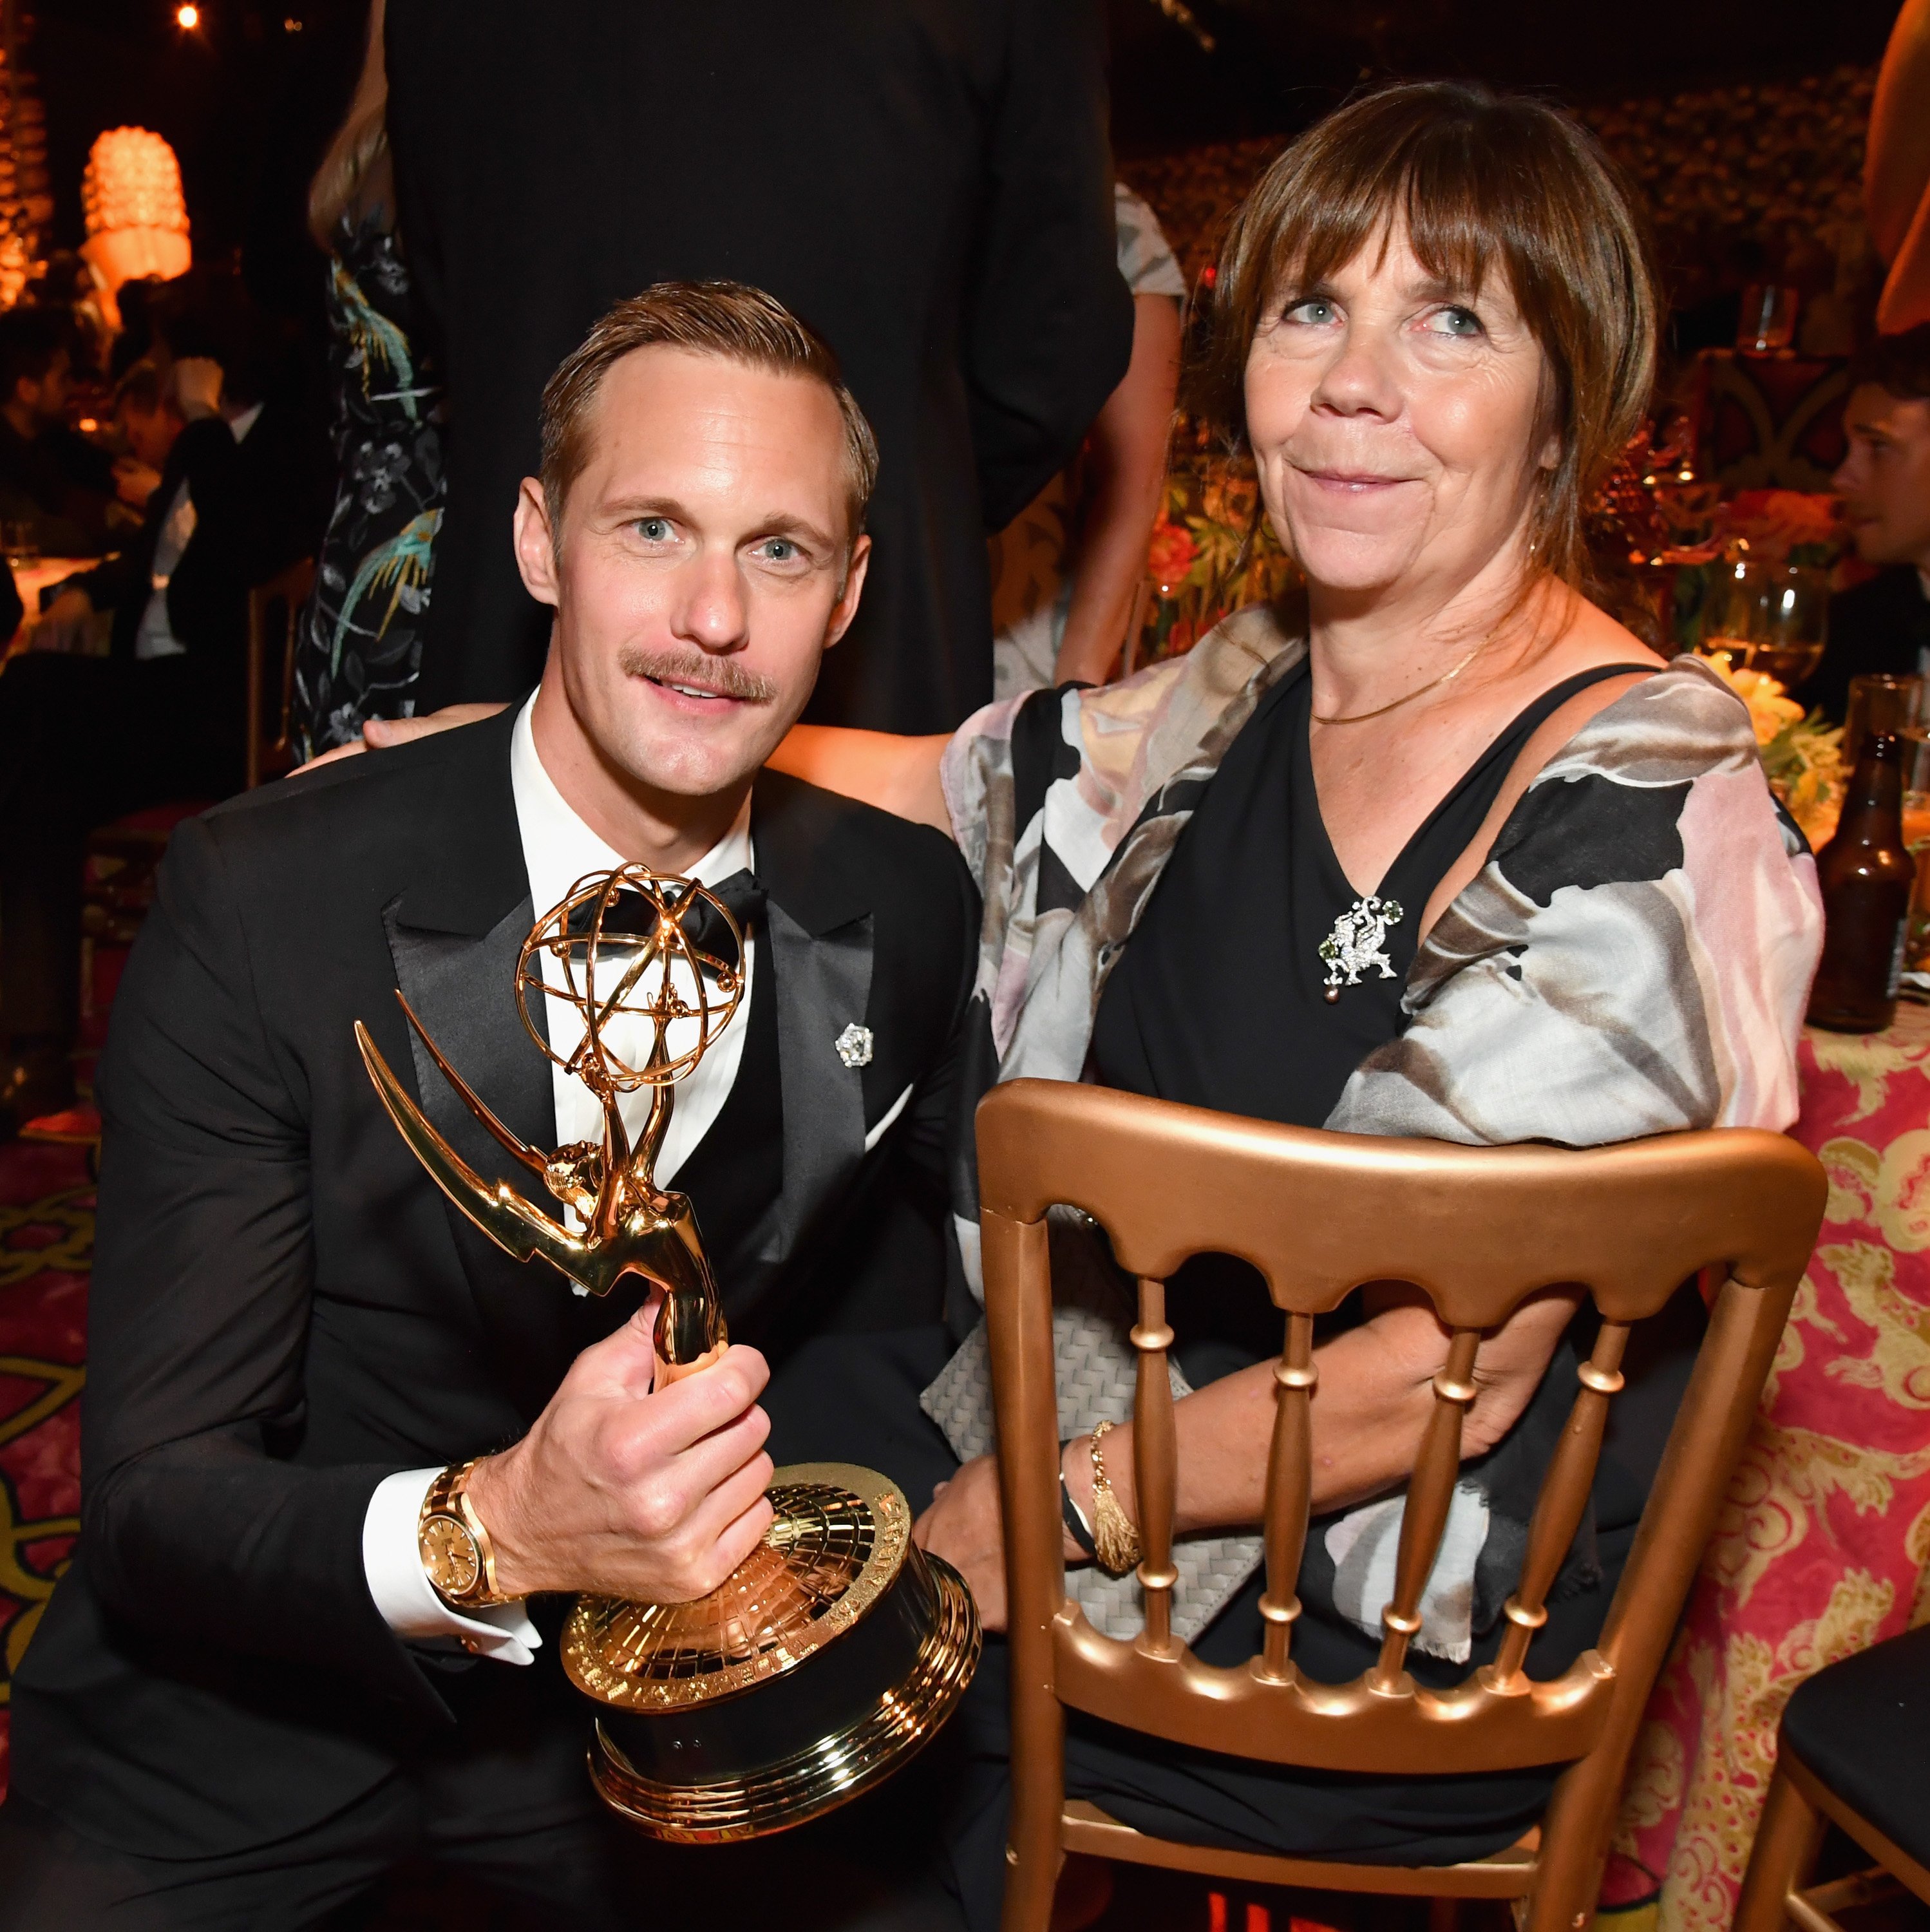 Alexander Skarsgard and My Skarsgard attend the HBO's Official 2017 Emmy After Party at The Plaza at the Pacific Design Center on September 17, 2017 in Los Angeles, California. | Source: Getty Images